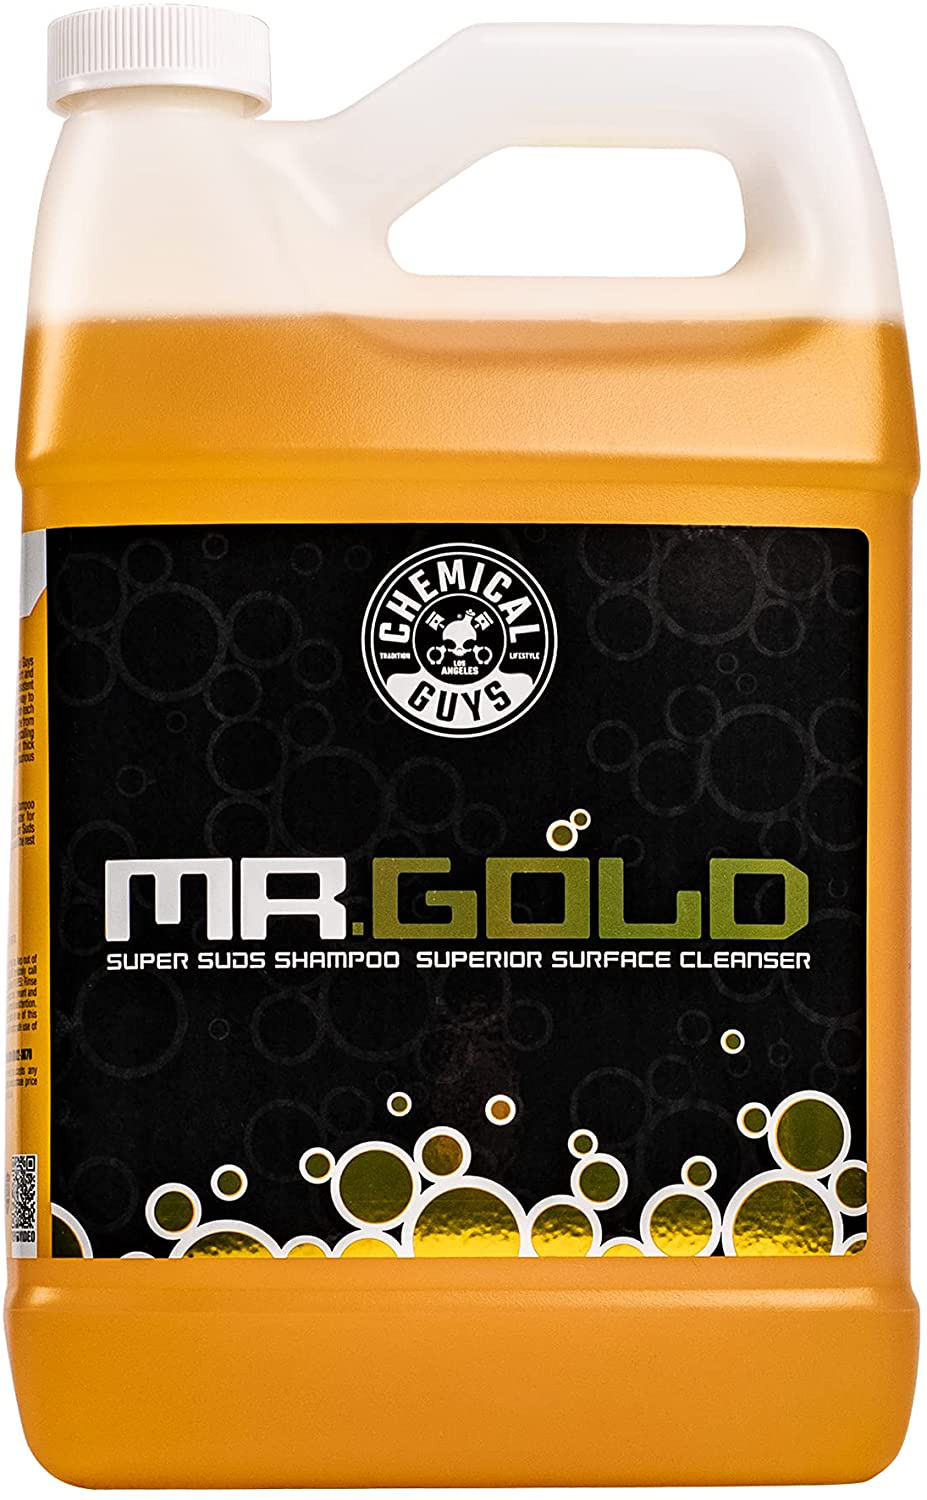 Chemical Guys Cws213 Mr. Gold Foaming Car Wash Soap 1 Gallon, Pina Colada Scent